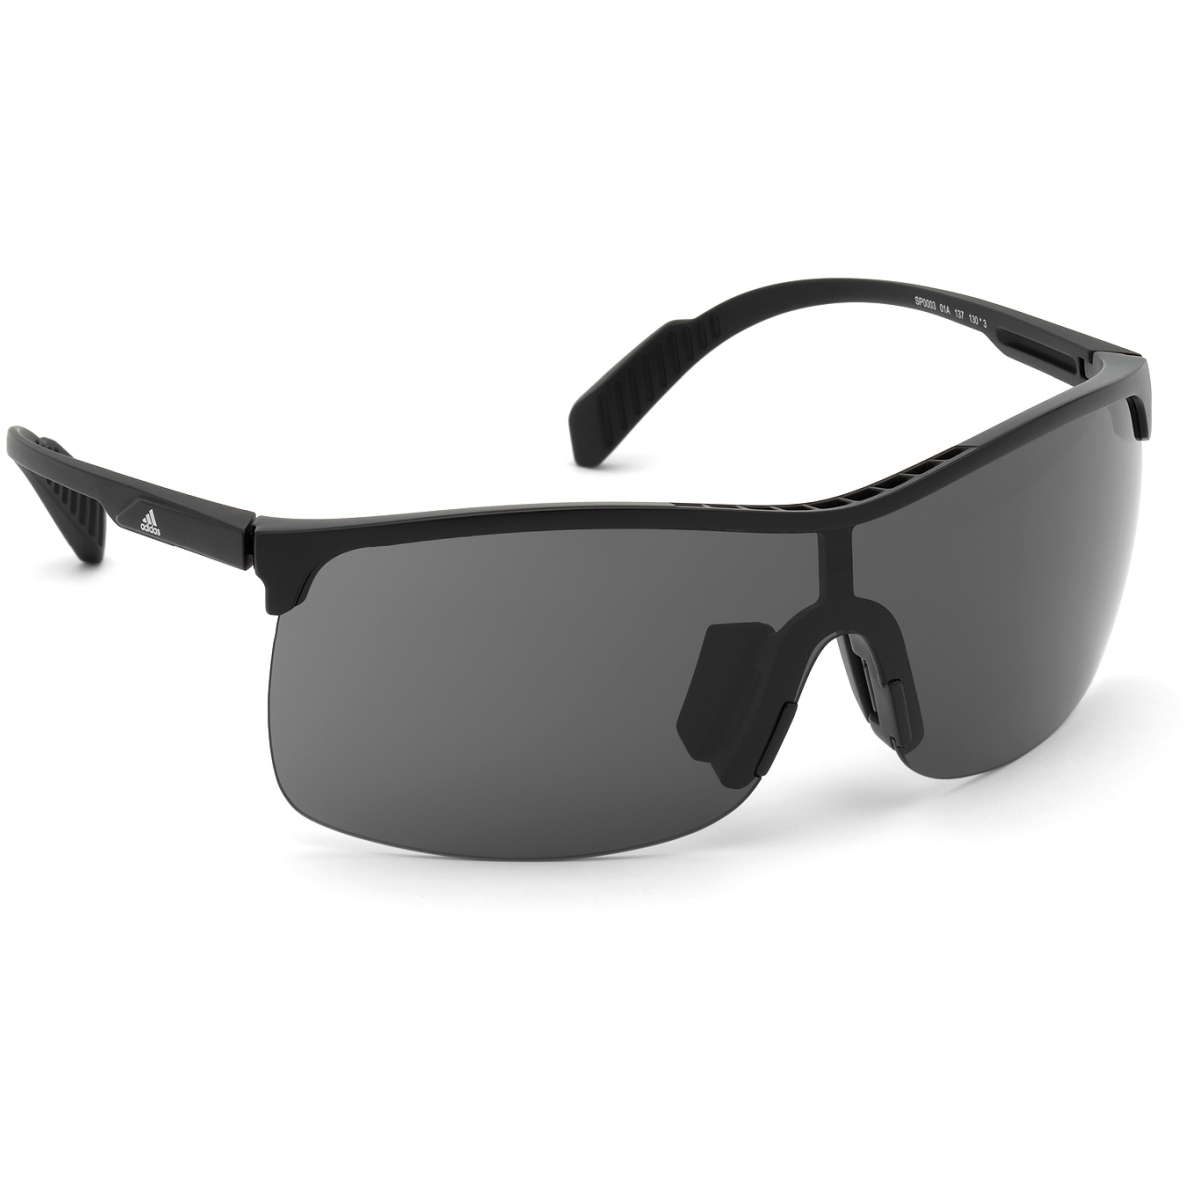 Picture of adidas Sp0003 Injected Sports Sunglasses - Shiny Black / Contrast Grey